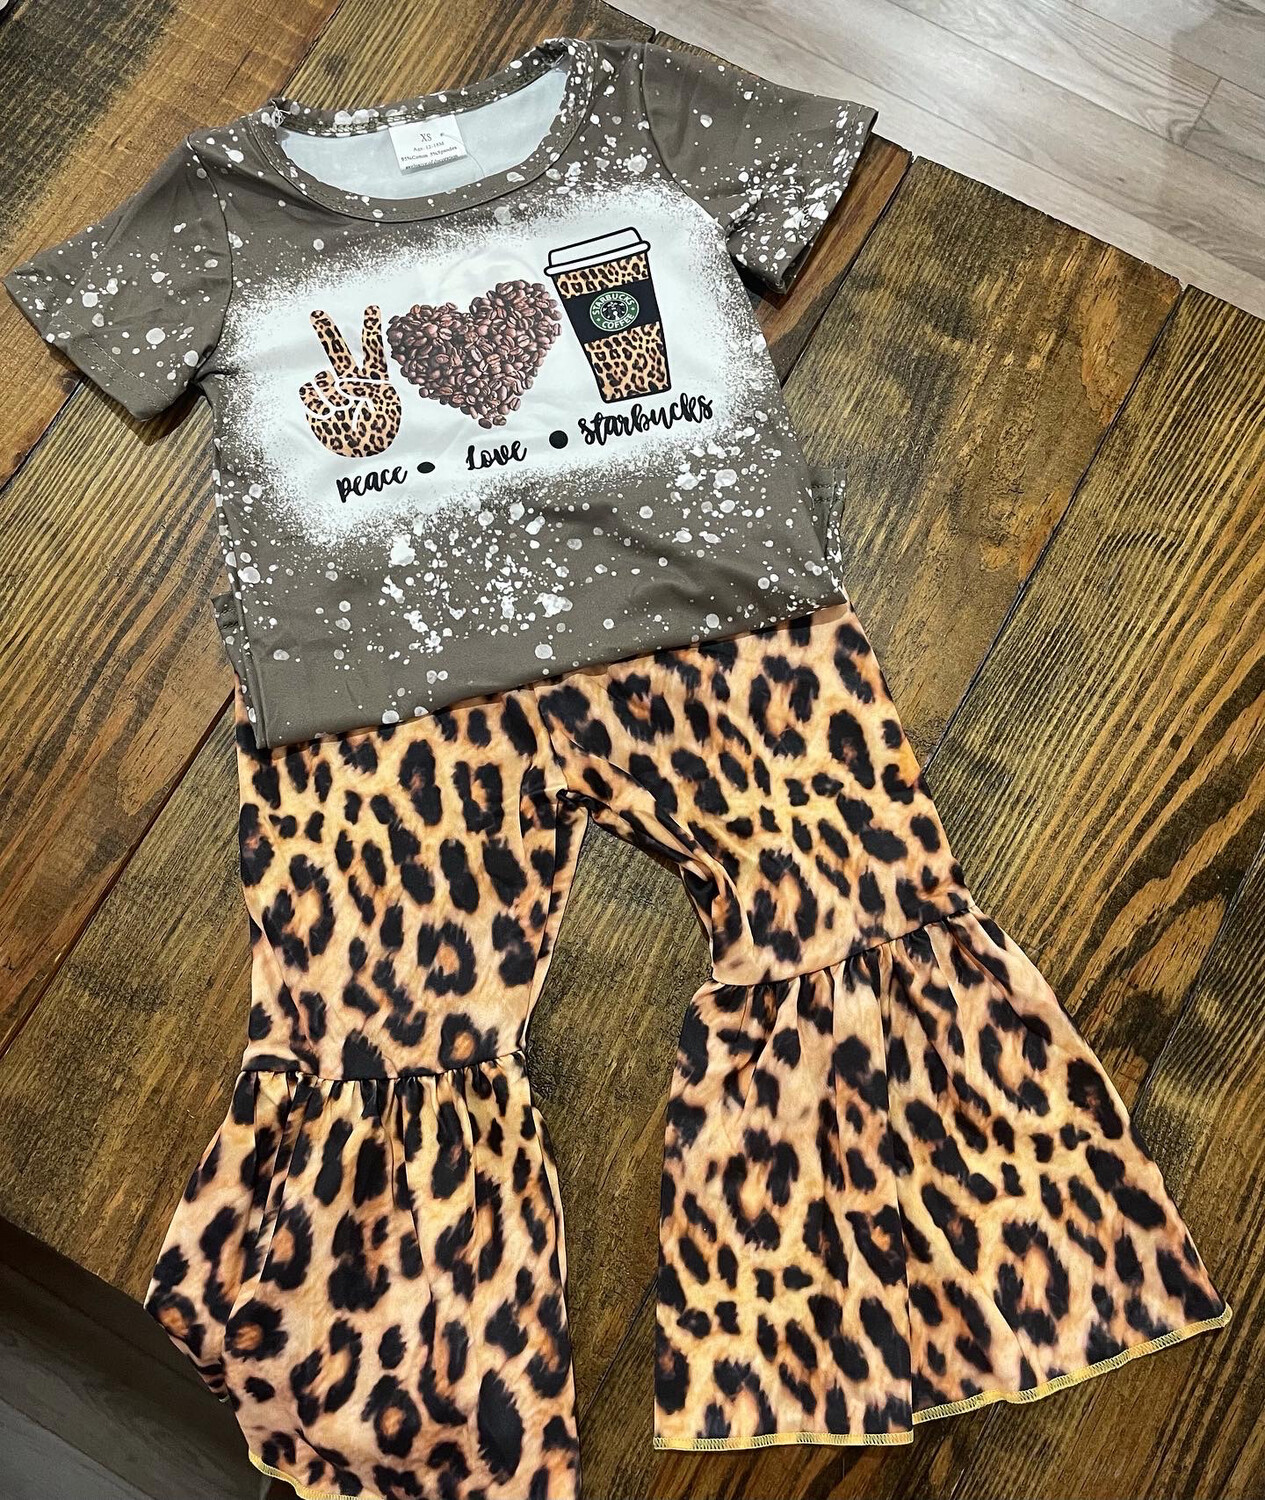 These are a few of my favorite things pants outfit 12-18 month